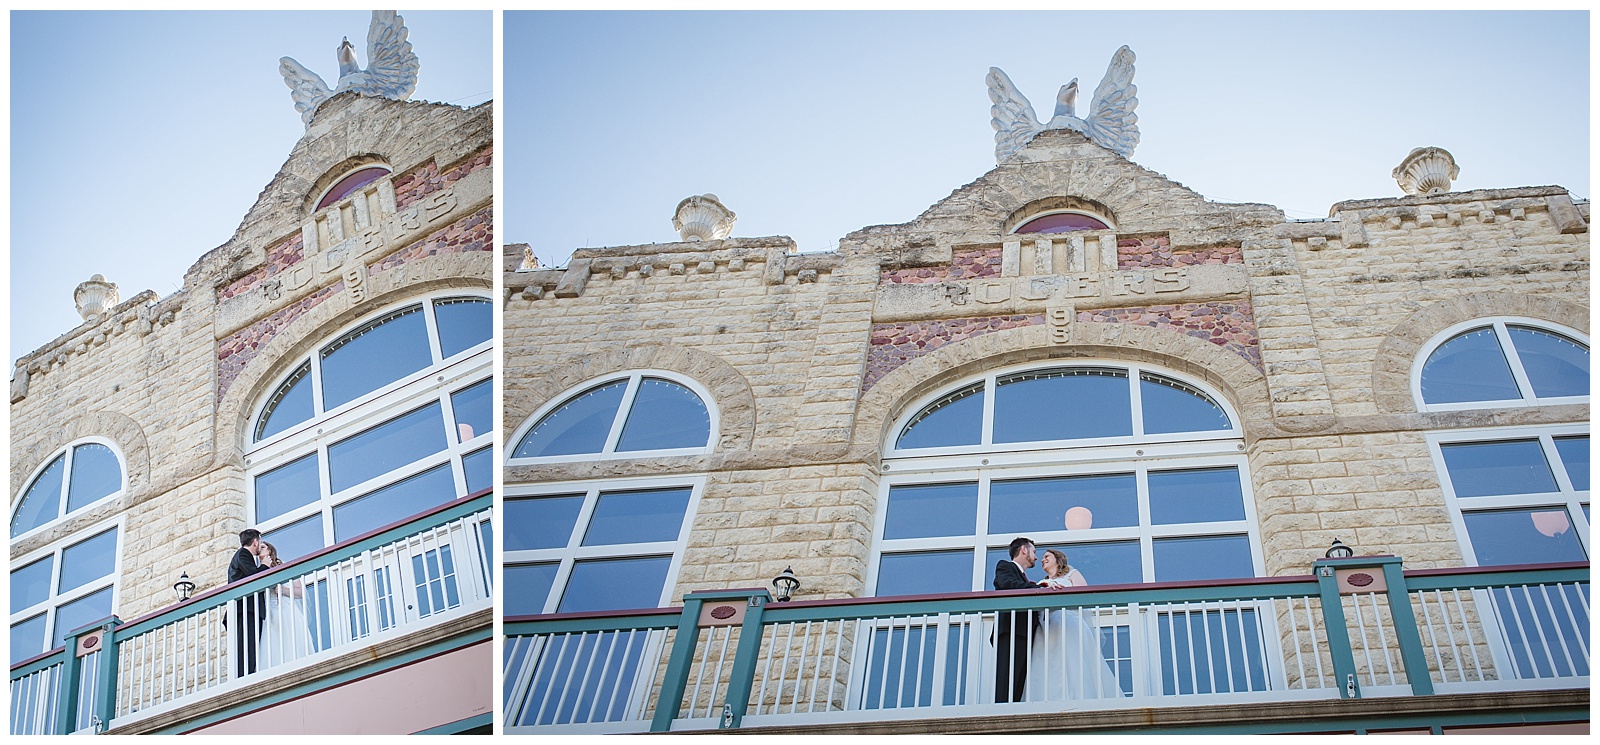 Wedding photography at the Columbian Theatre in Wamego, Kansas.